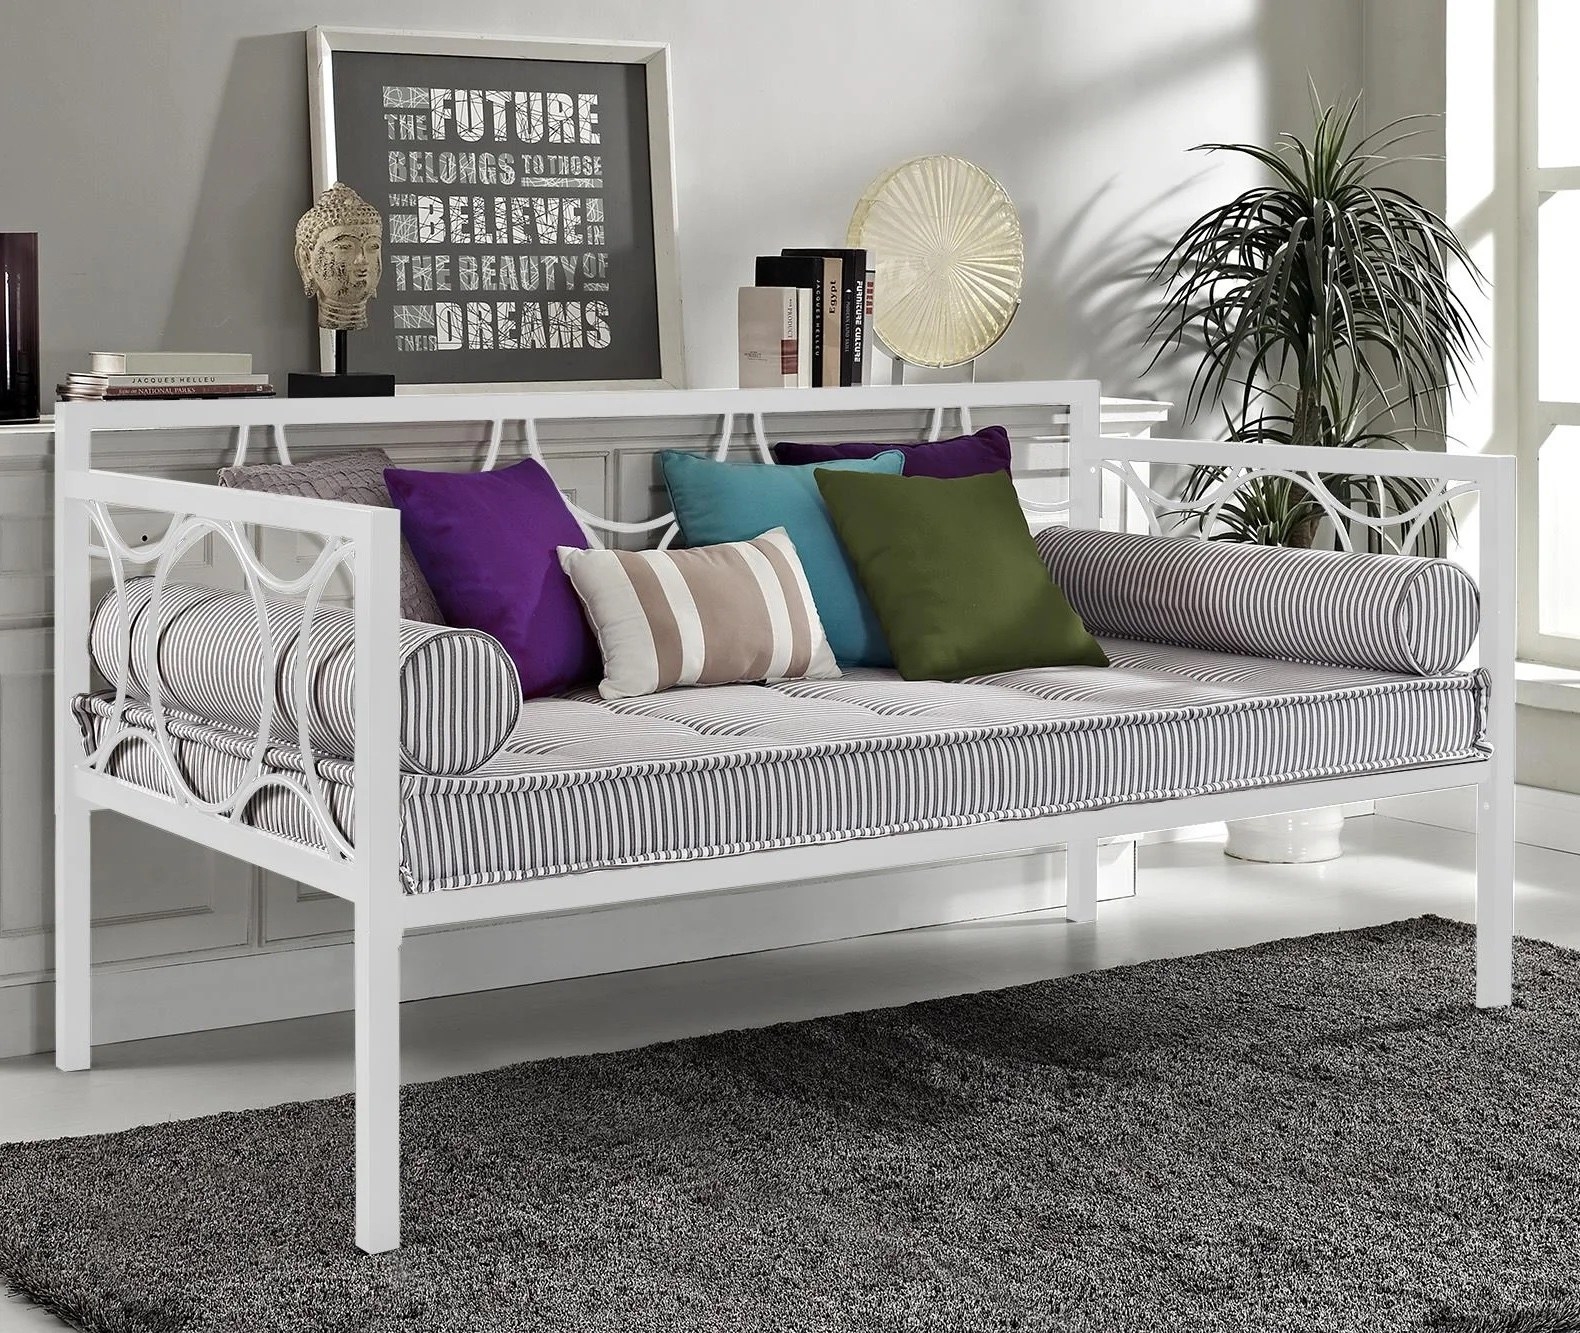 A daybed